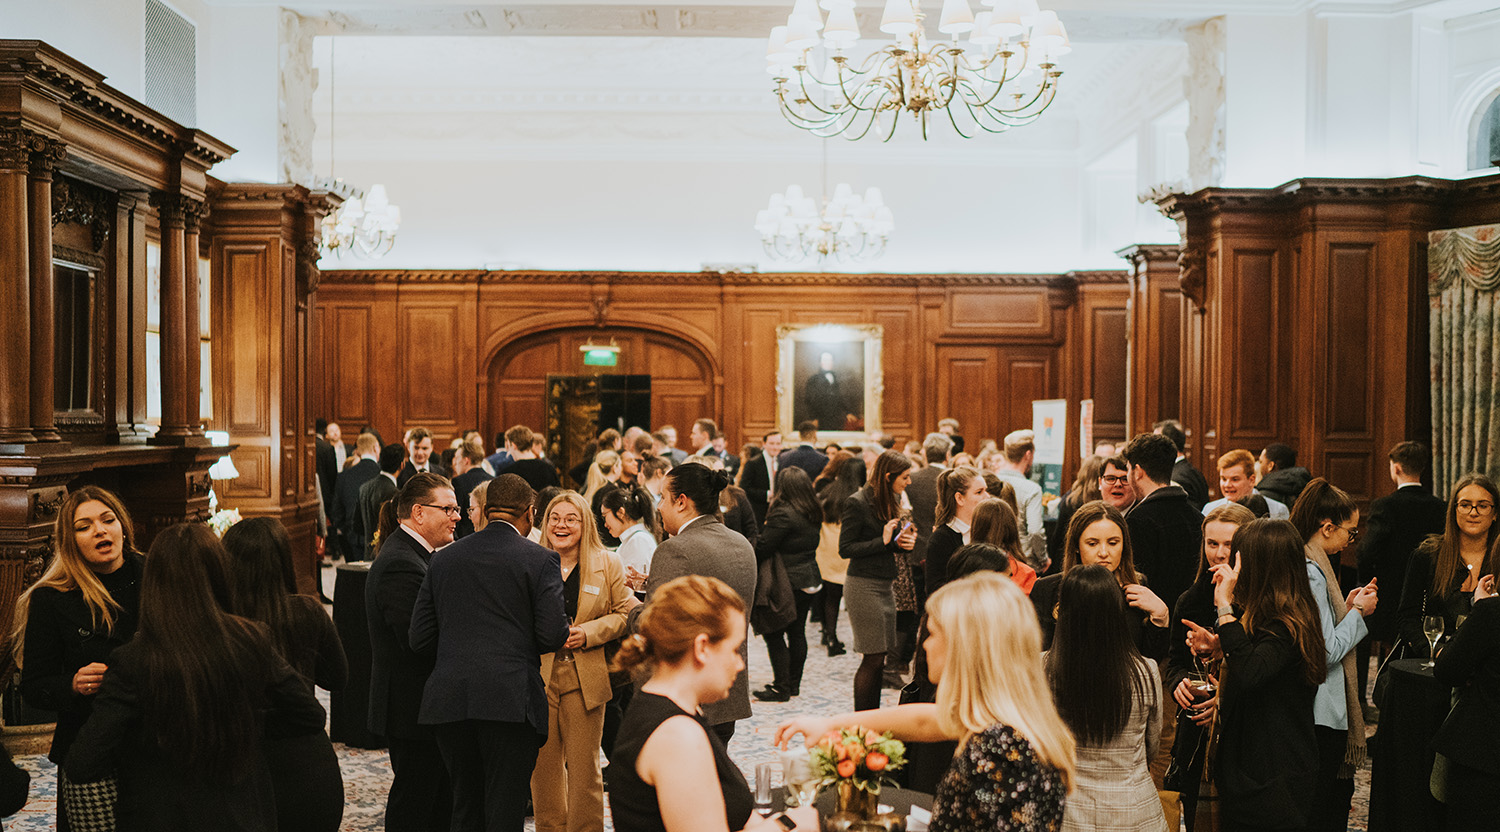 Our annual Alumni Networking event welcomes graduates, current students and our industry partners to mingle in some of London's most renowned locations.